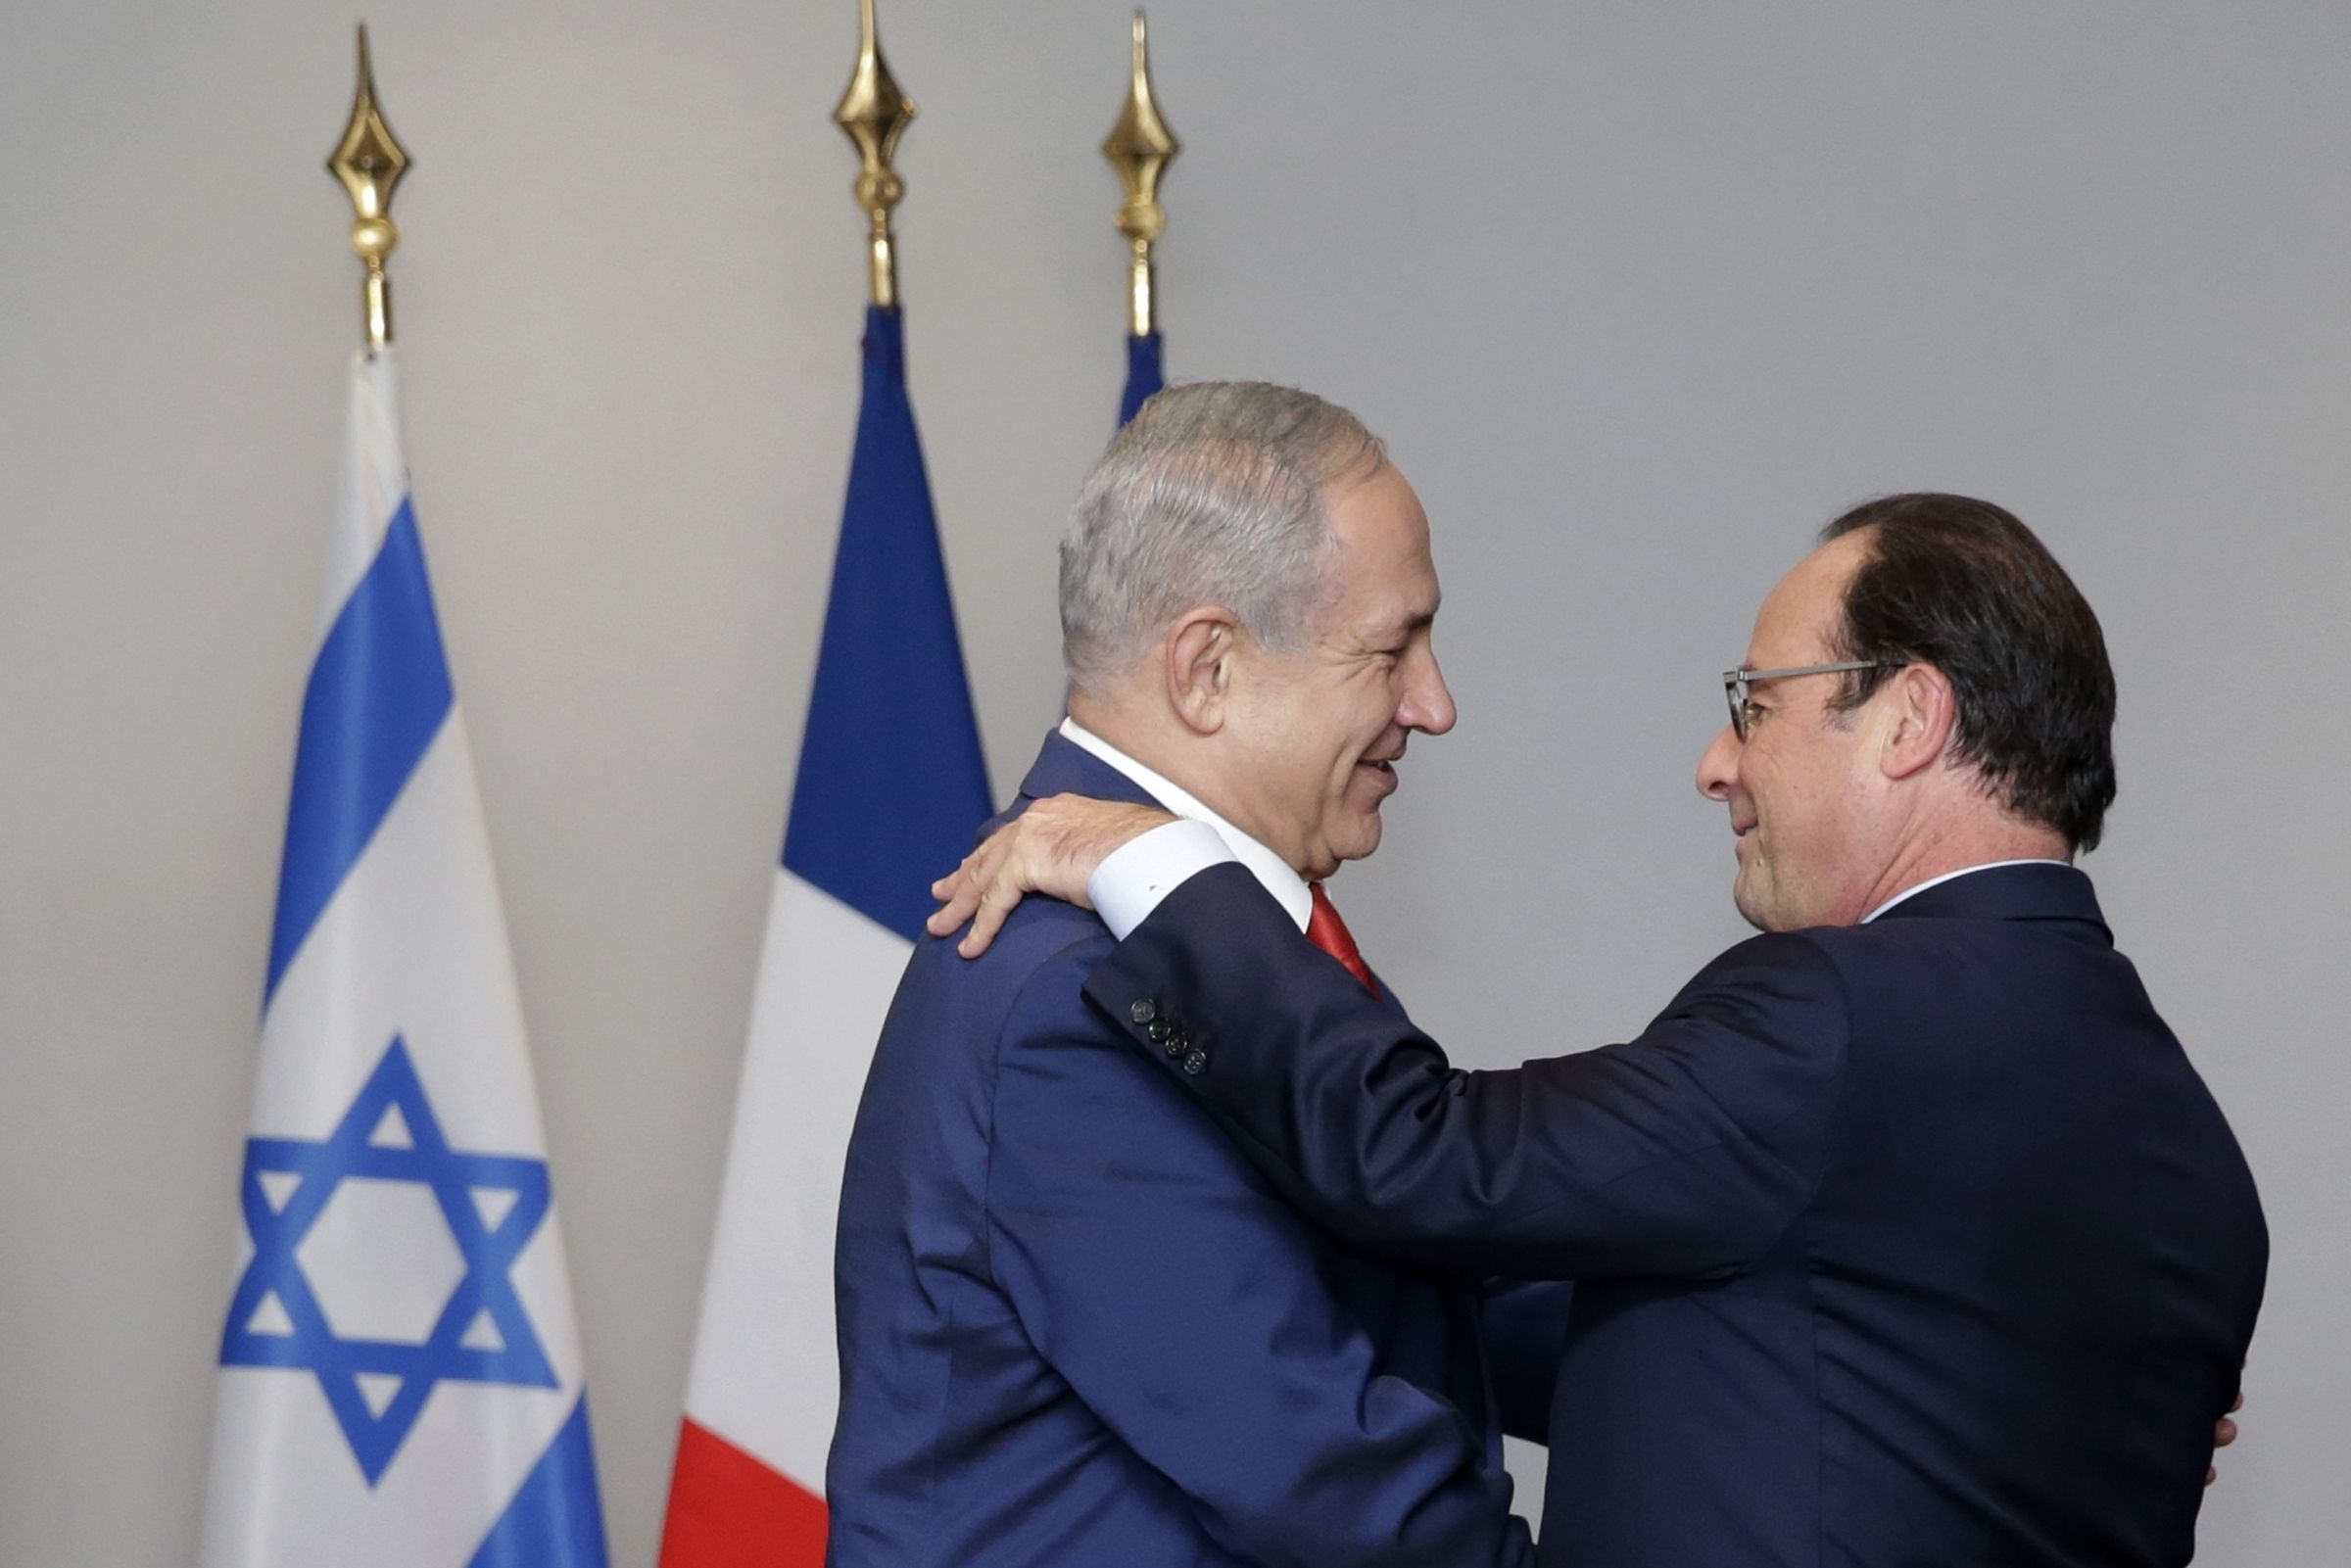 France Presents Israel With Plan To Host International Peace Summit With Palestinians